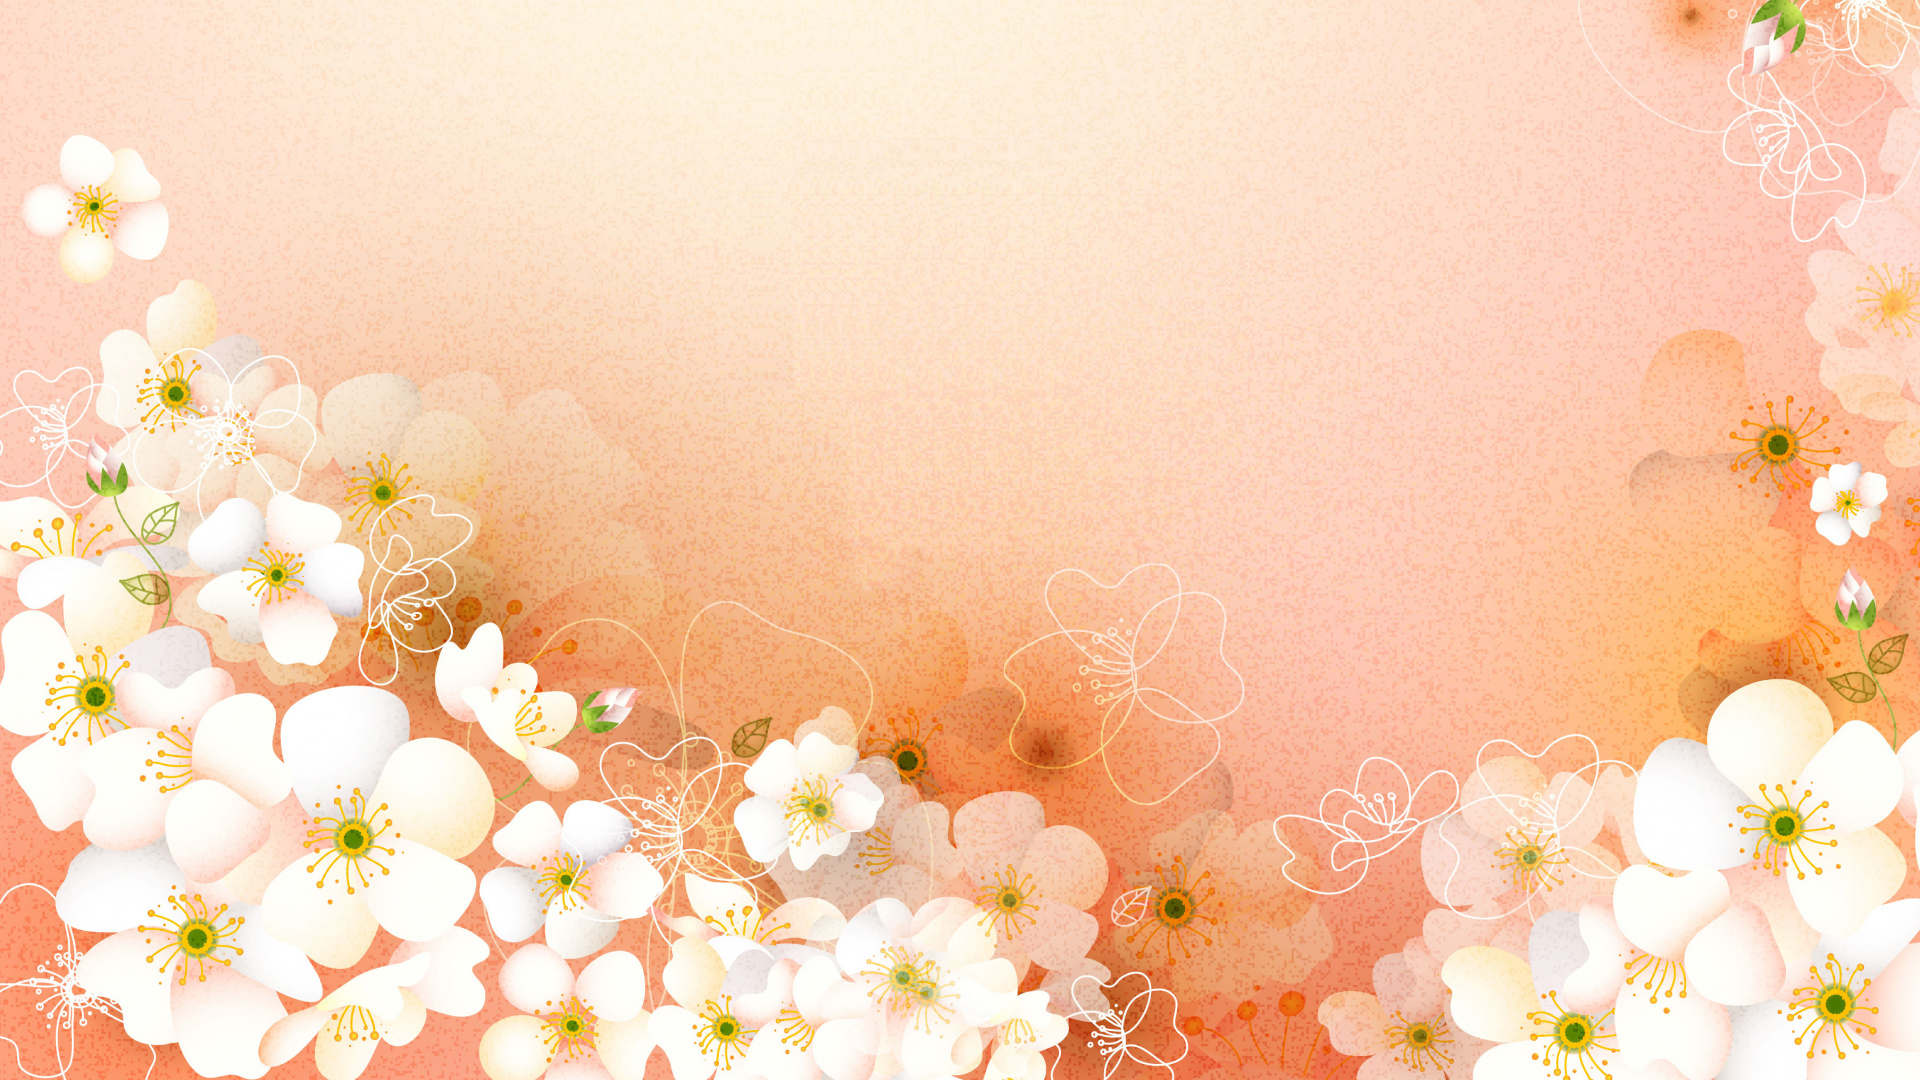 White and Yellow Flowers With Pink Background. Wallpaper in 1920x1080 Resolution